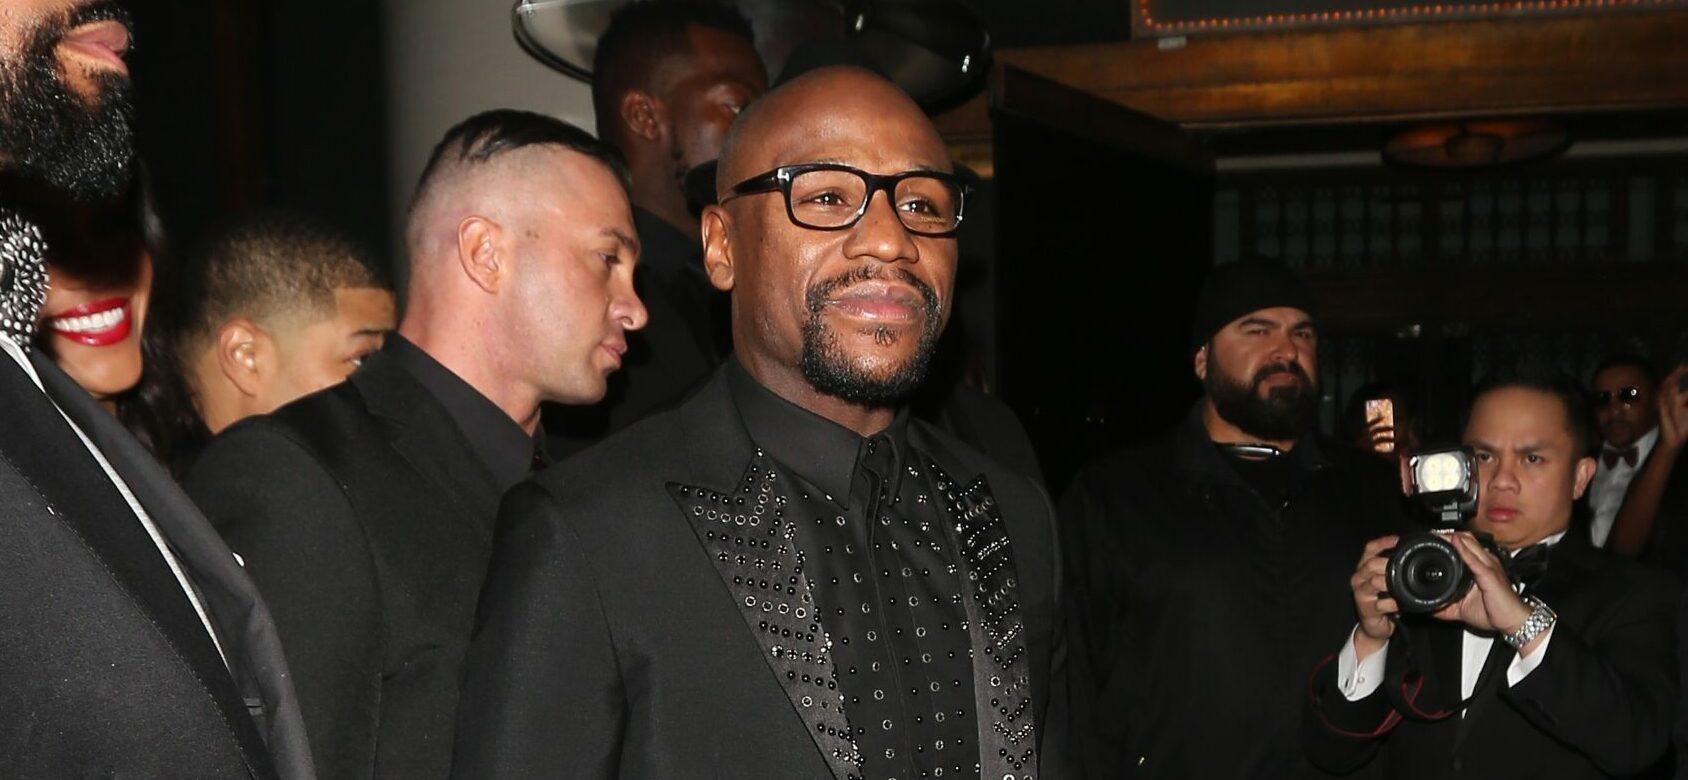 Floyd Mayweather Sued Over Alleged Beating Involving His Security Team